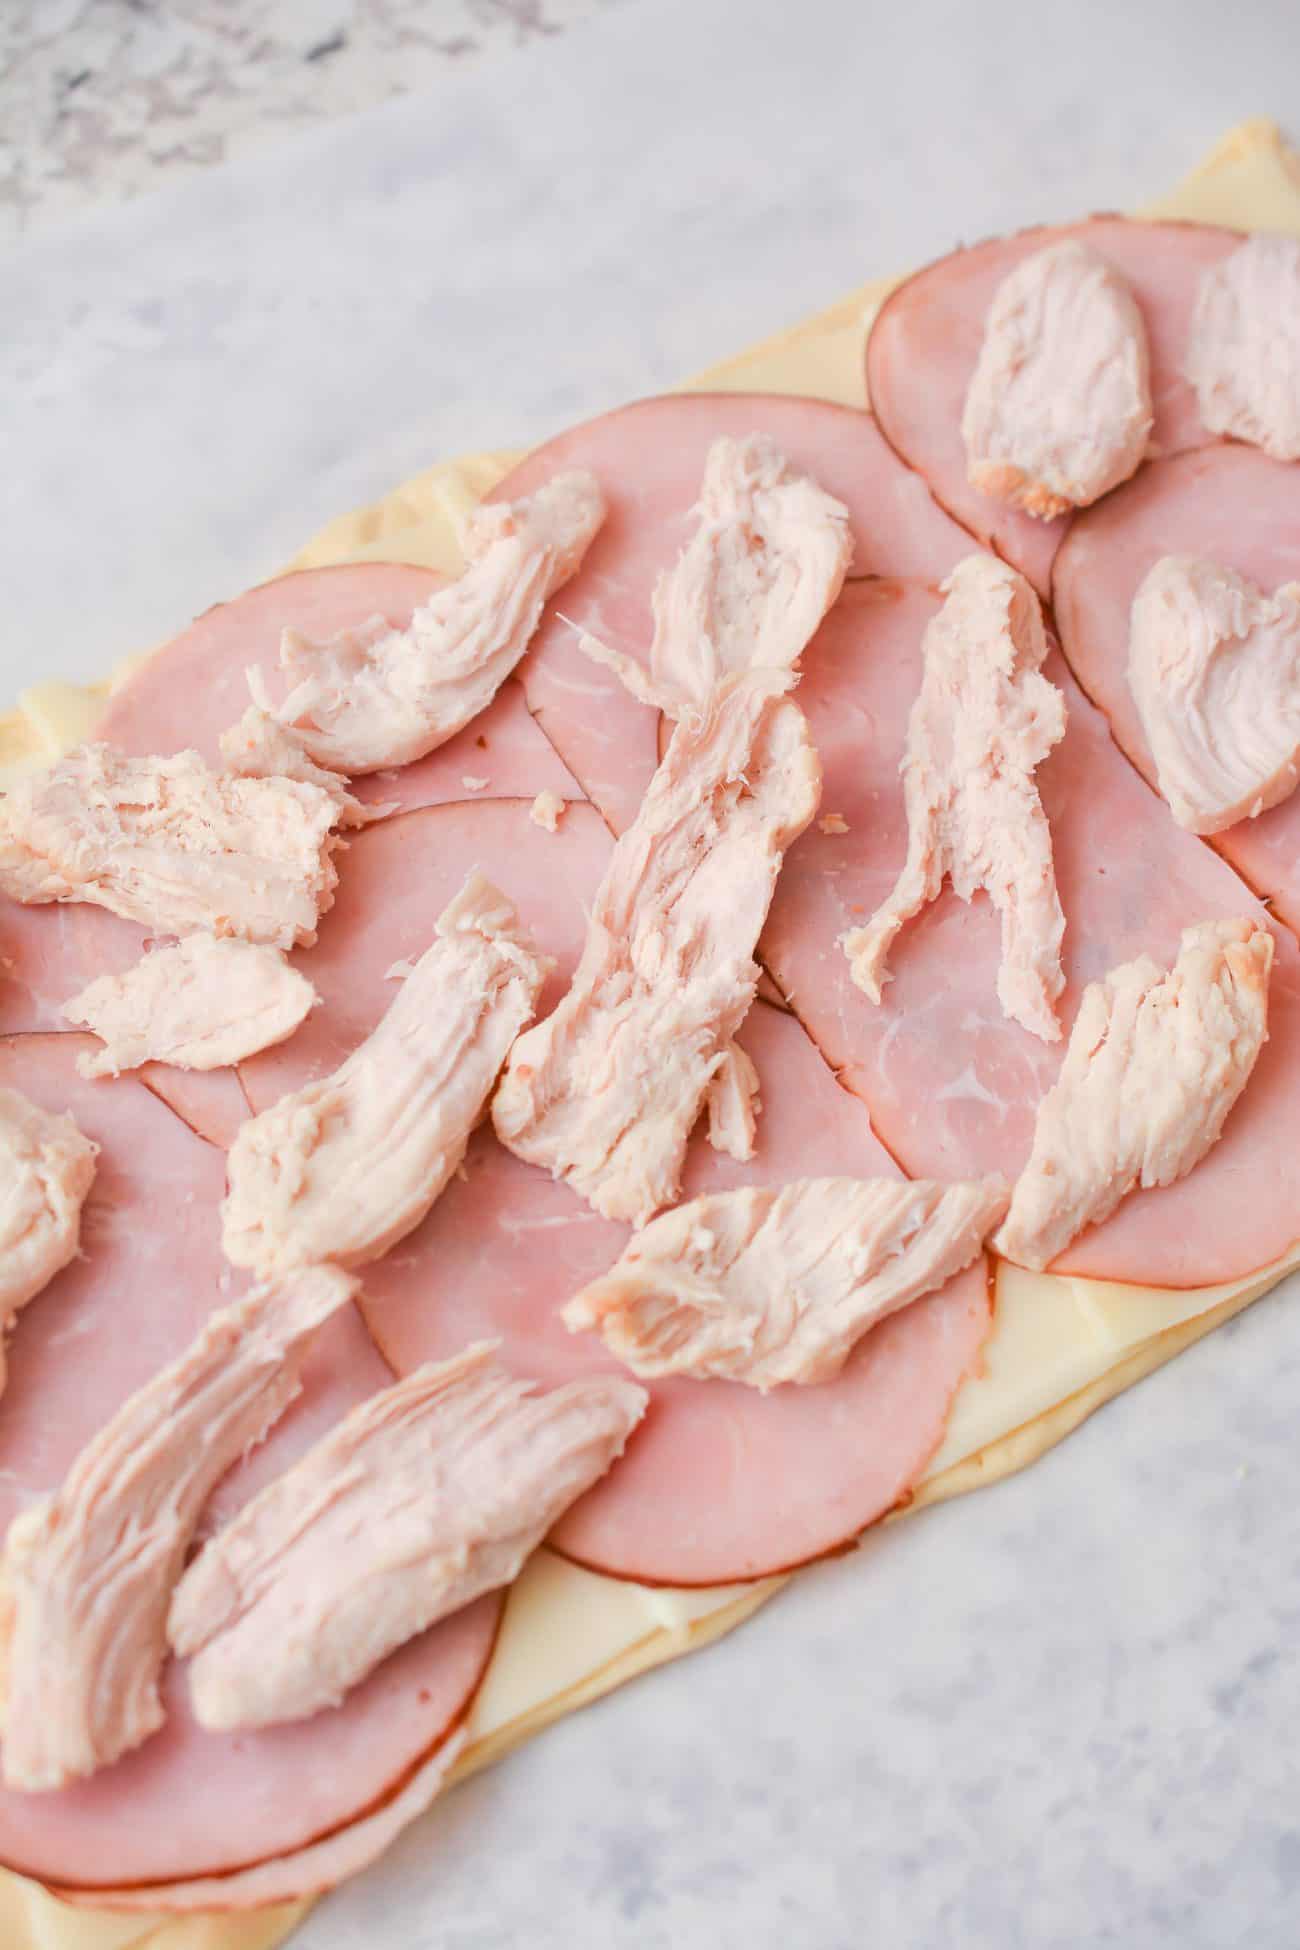 Spread the chicken pieces over the top of the ham slices.